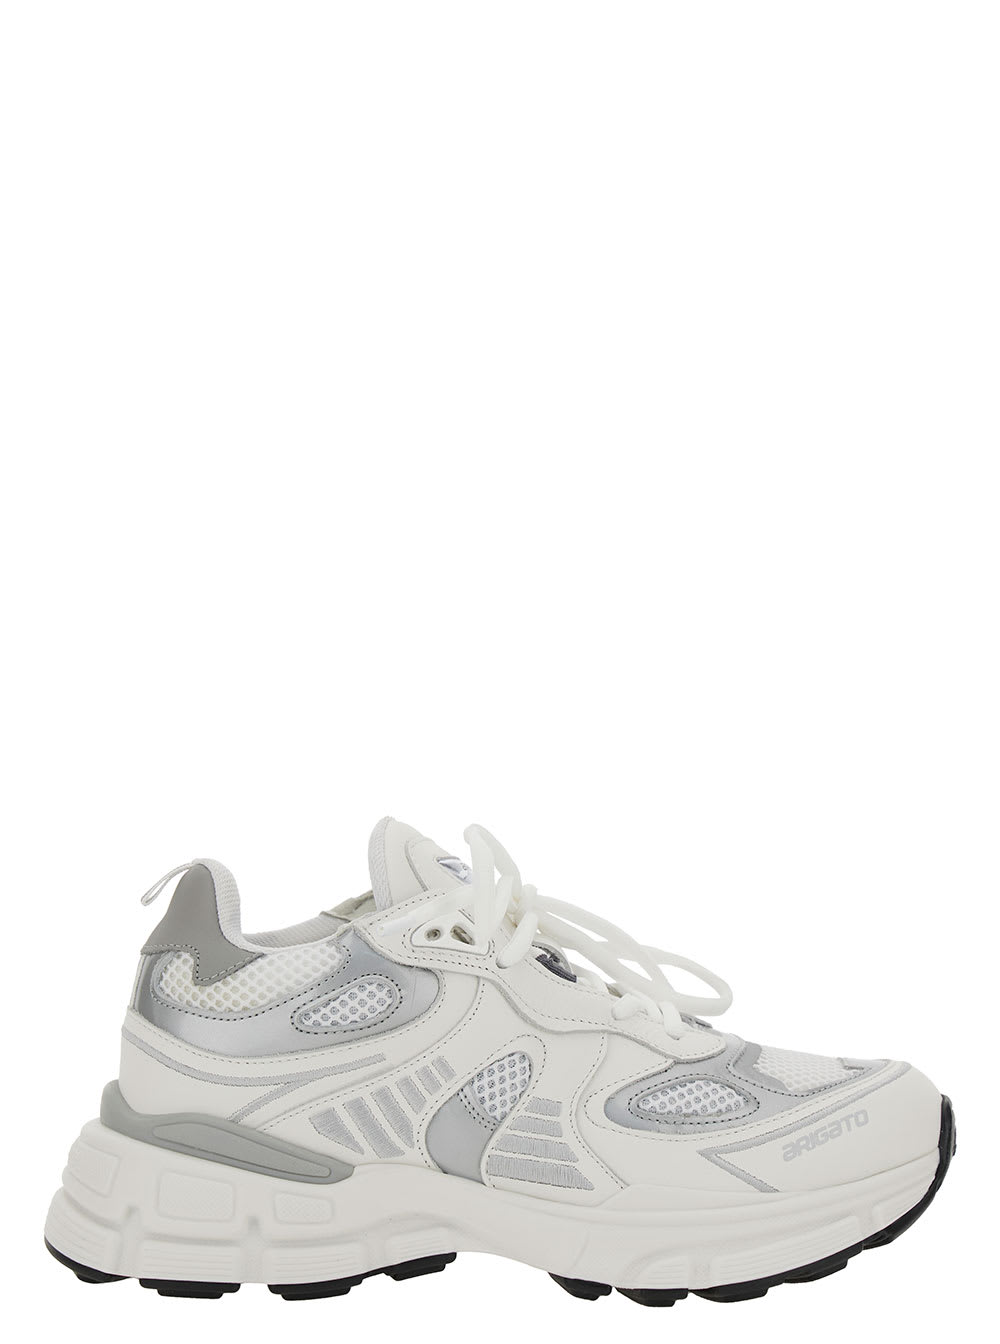 AXEL ARIGATO MARATHON GHOST RUNNER WHITE LOW TOP SNEAKERS WITH REFLECTIVCE DETAILS IN LEATHER BLEND WOMAN